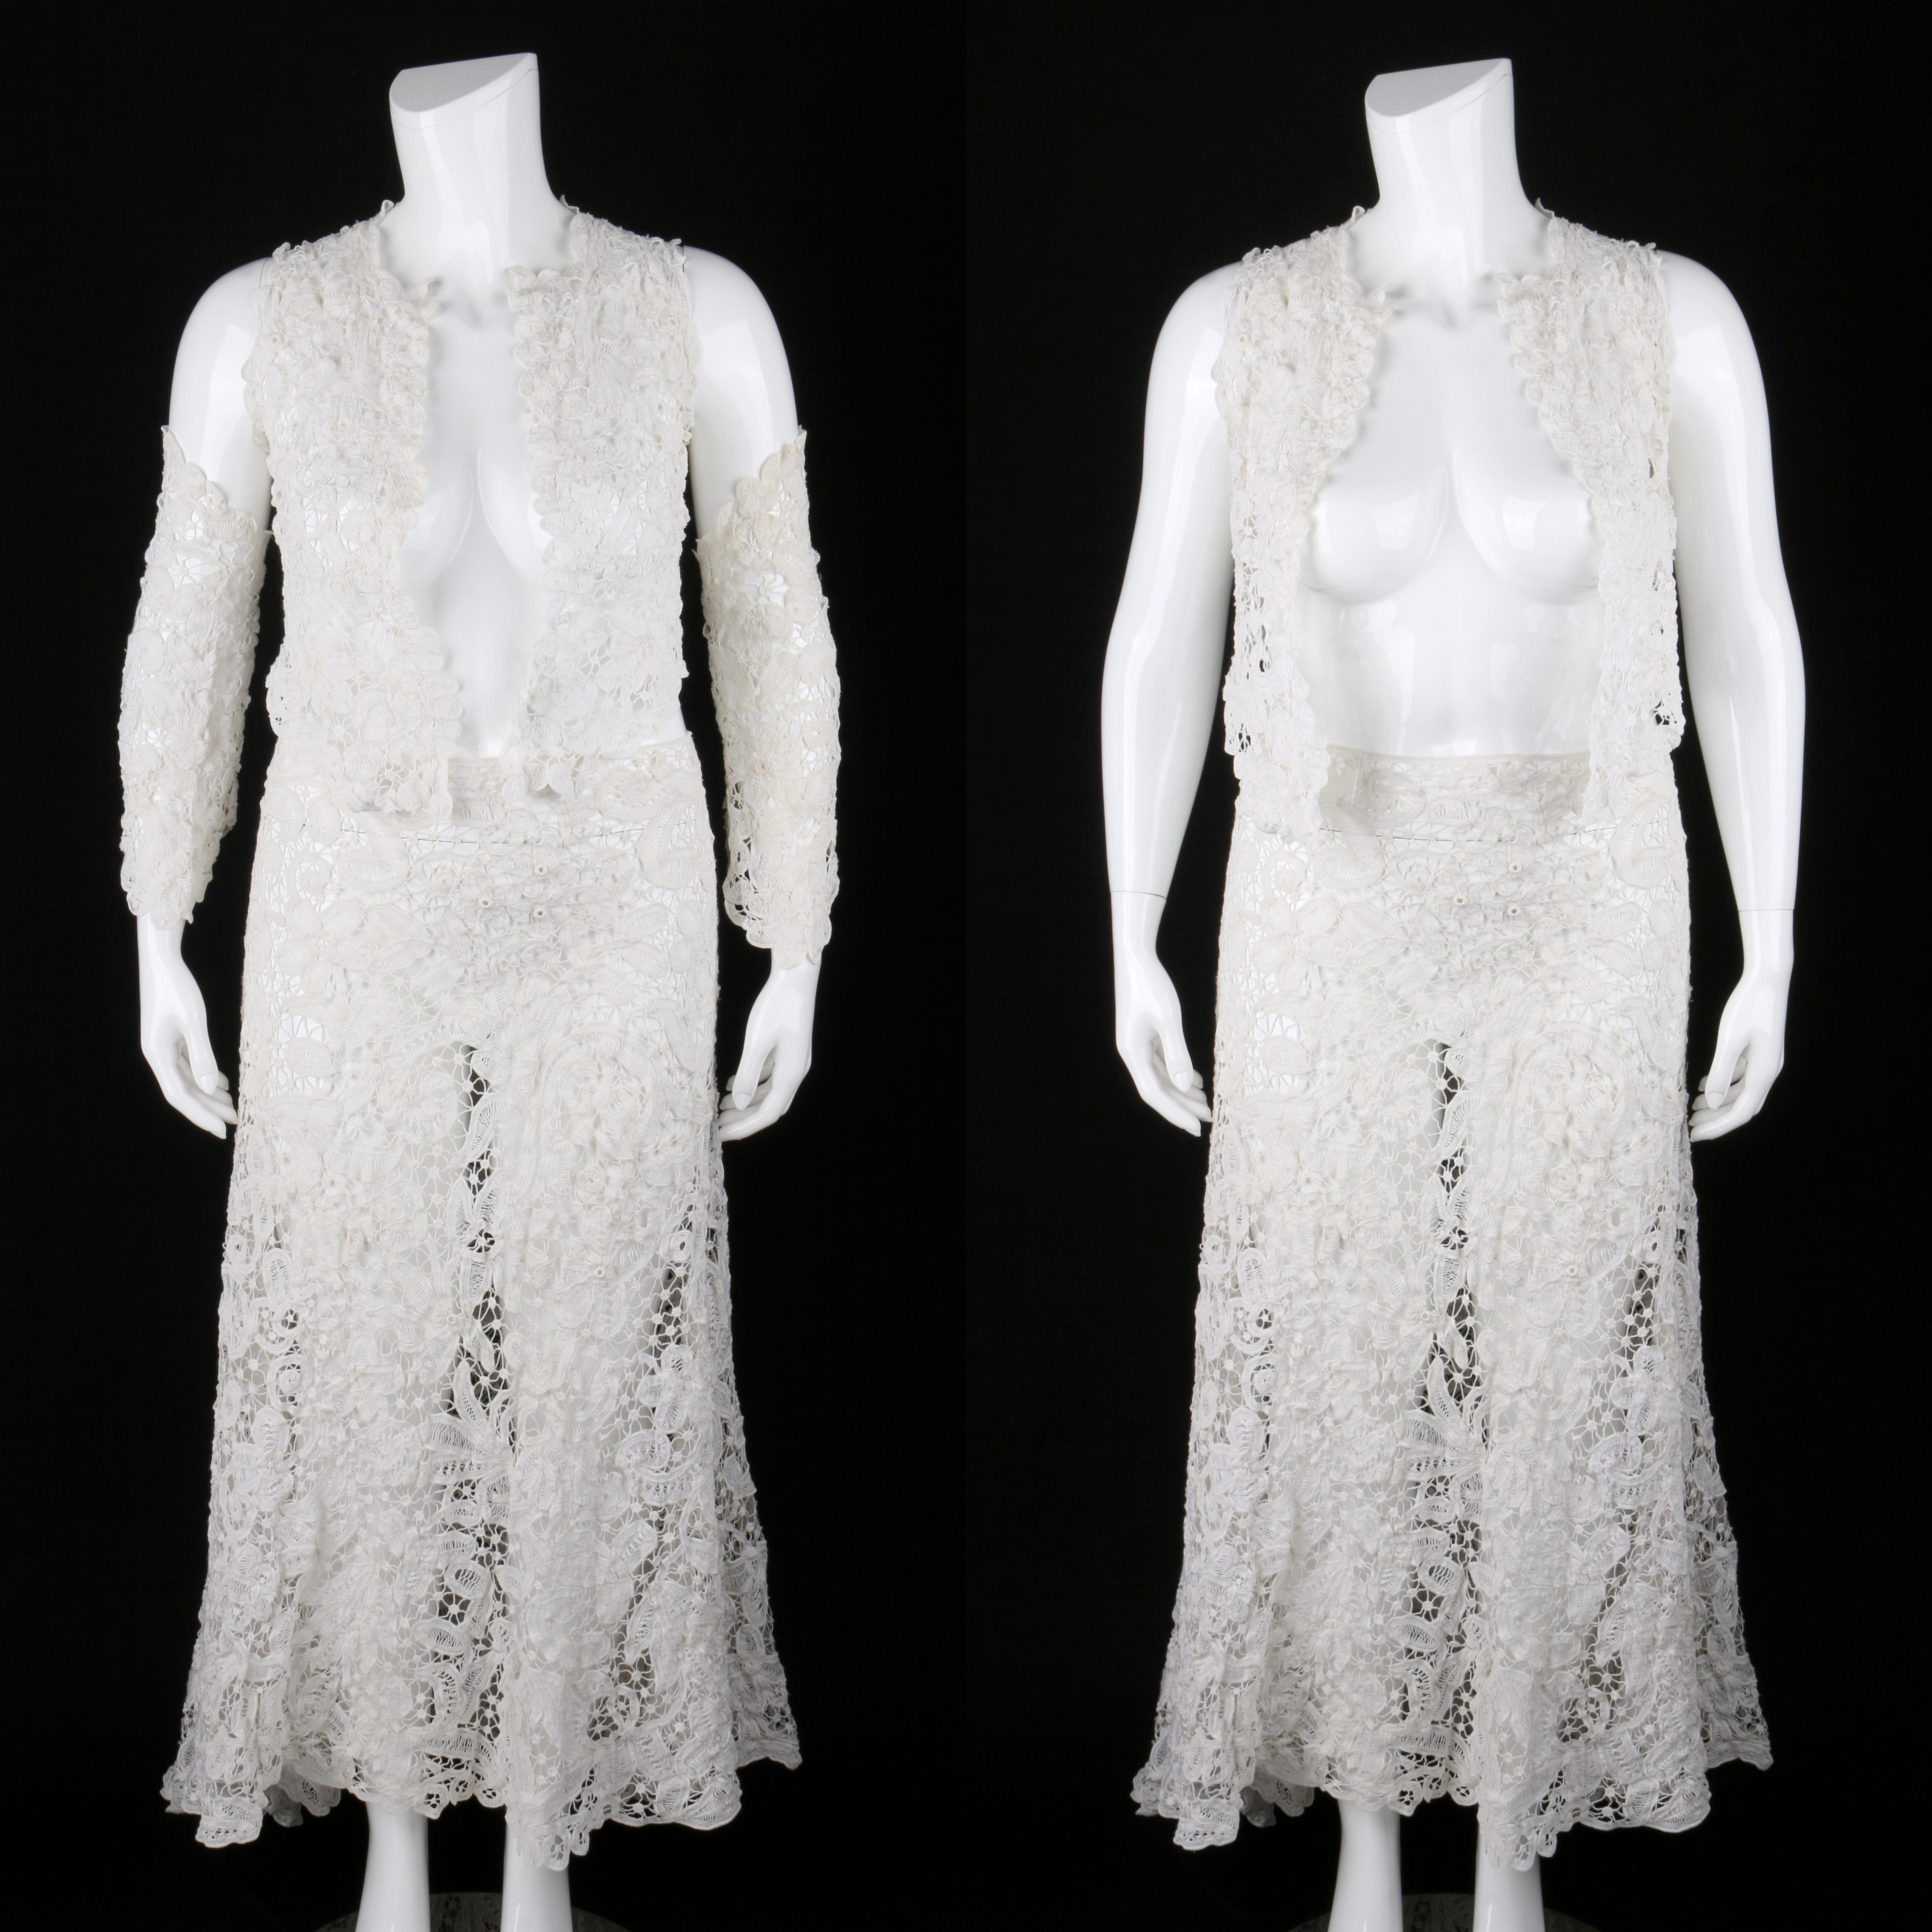 VICTORIAN / EDWARDIAN c.1900s OOAK White Gros Point De Venise Lace 4 Pc Skirt Top Sleeve Set
Circa: 1900s 
Style: 4 Pc skirt, vest, sleeve set
Color(s): White
Lined: No
Unmarked Fabric Content (feel of): Cotton
Additional Details / Inclusions: